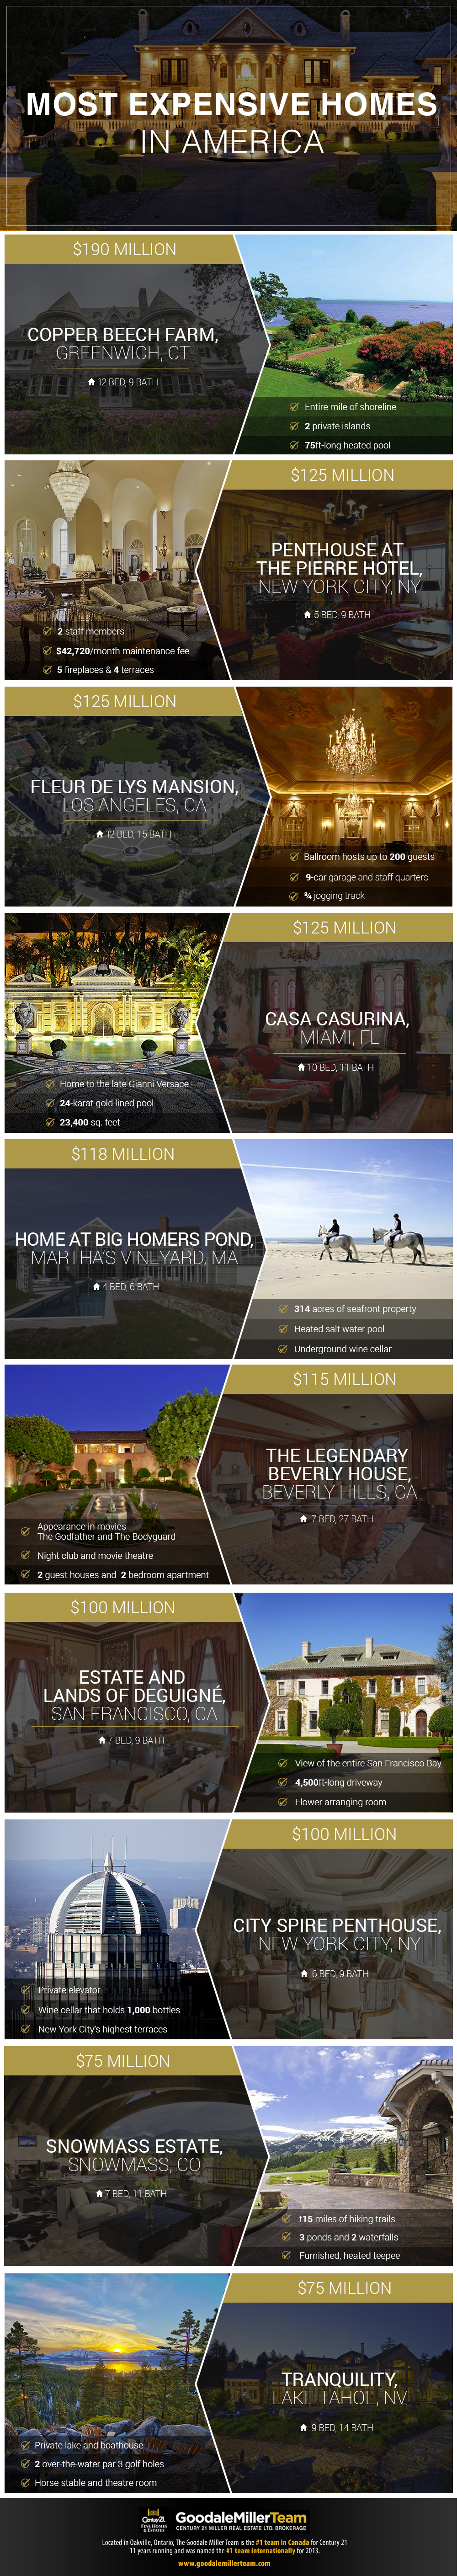 The Most Expensive Homes in the USA